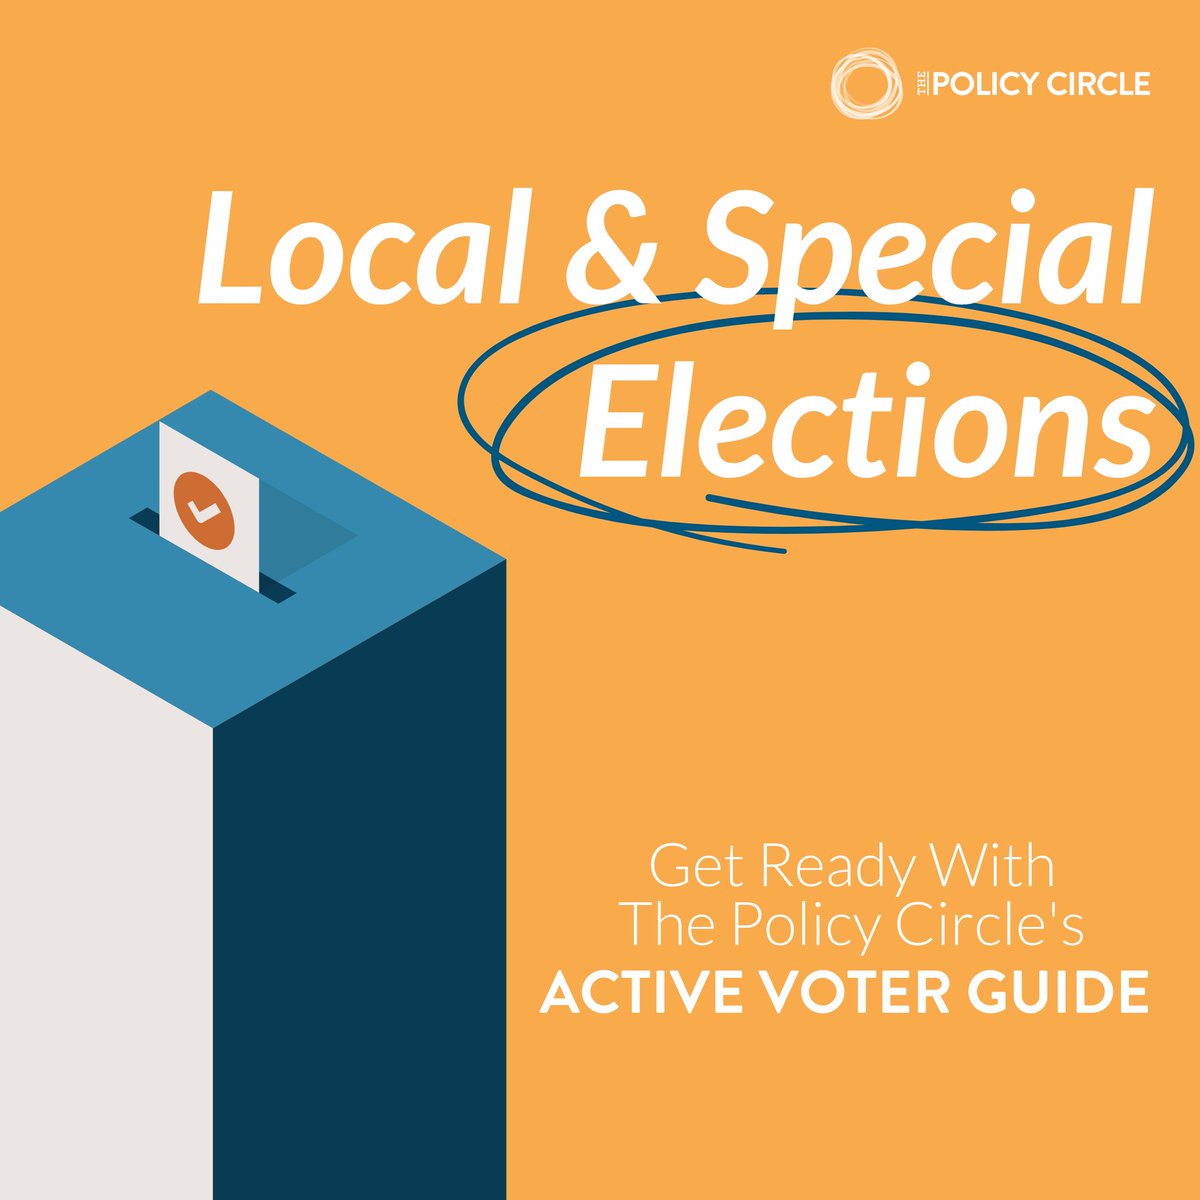 Did you know that there are 150+ elections happening across the country during the remainder of April and May? Our Active Voter Guide covers how to register, research a candidate, develop an assessment scorecard, and get involved by becoming a volunteer: bit.ly/3atXeRK